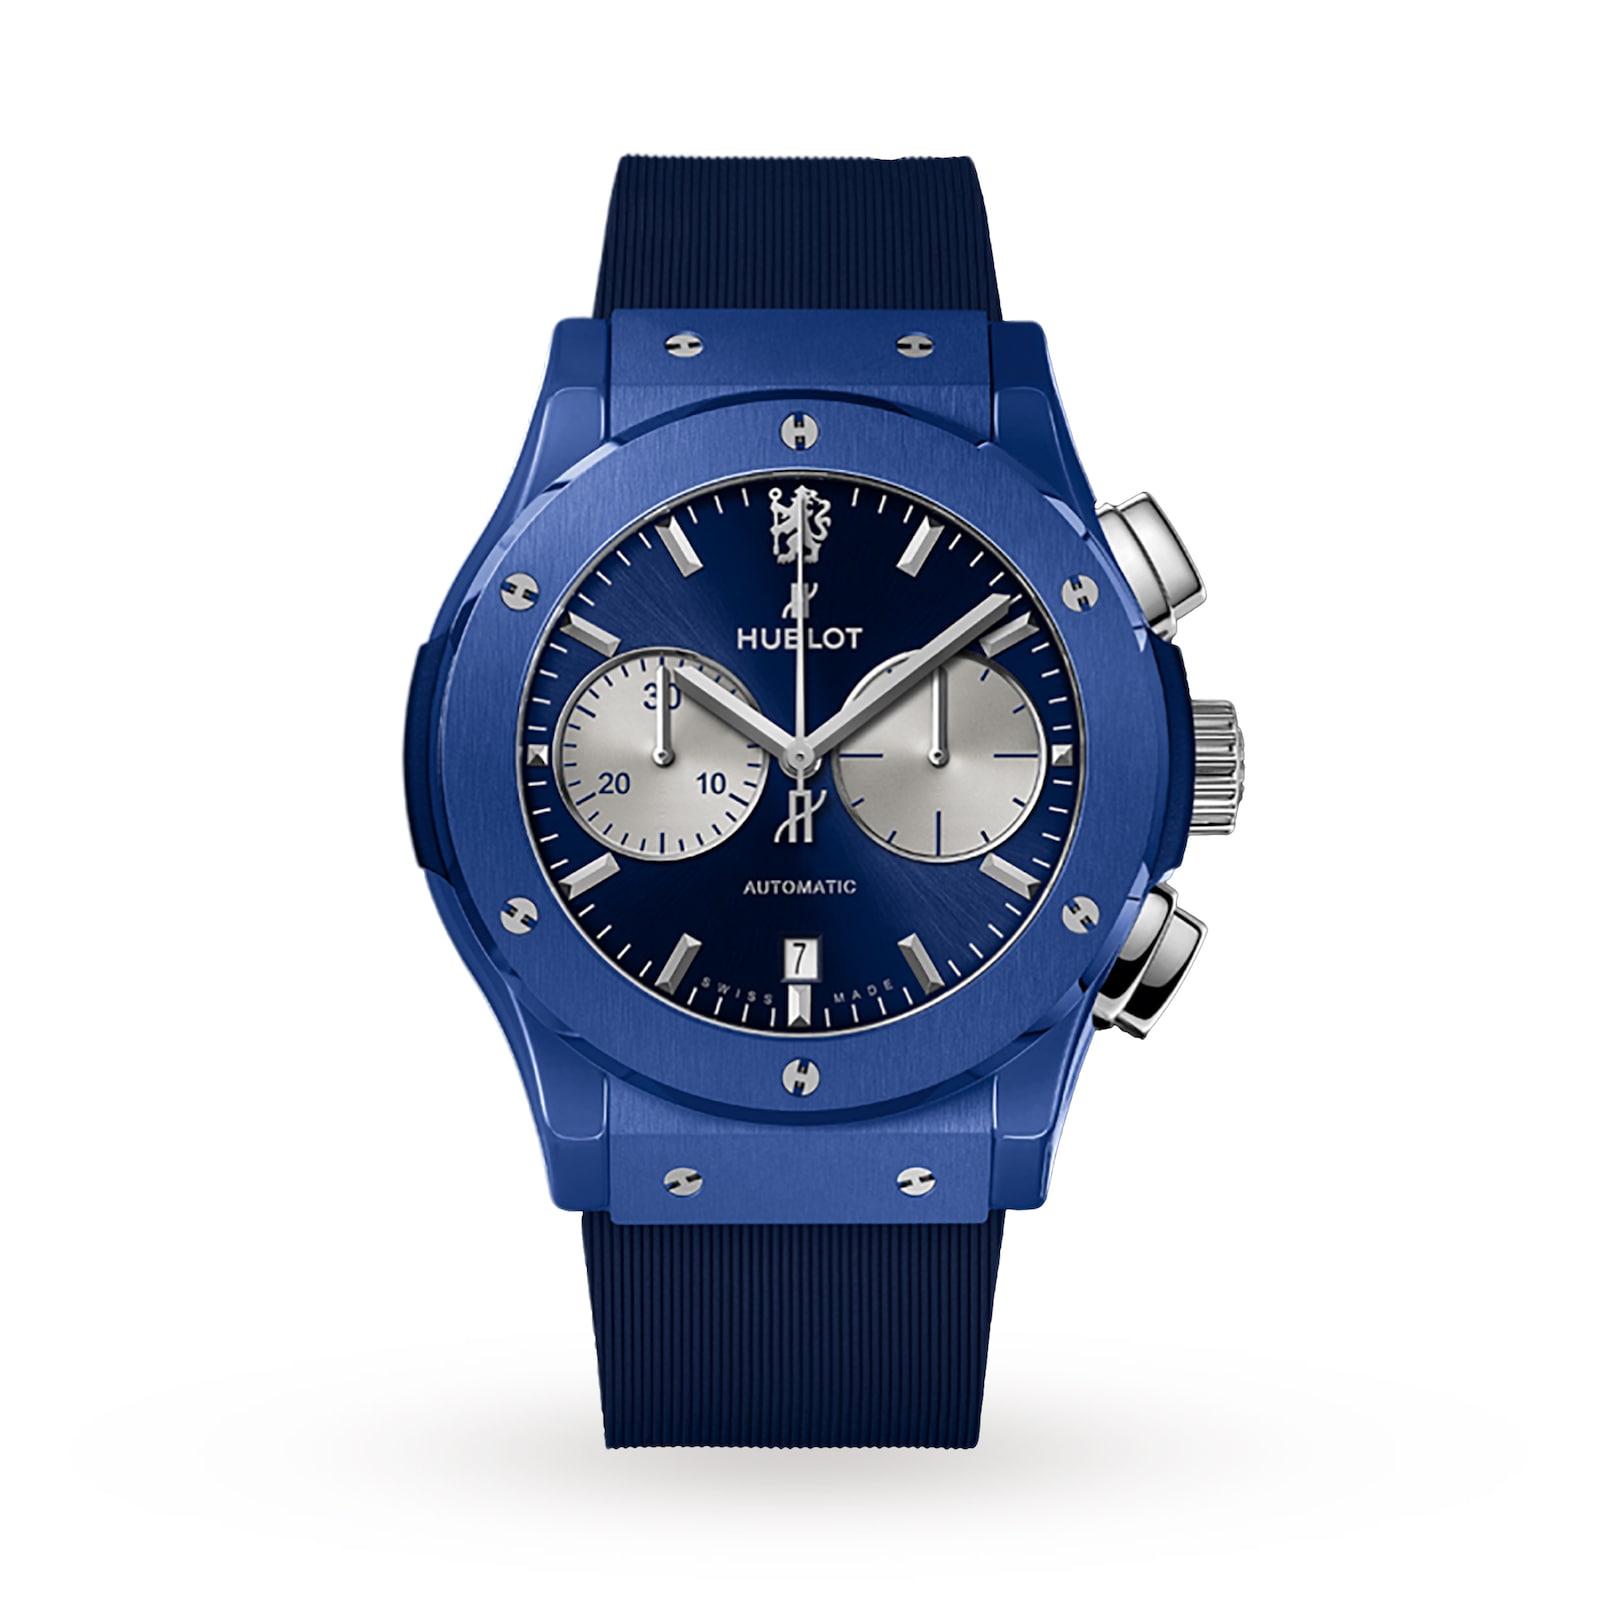 Hublot is the Official Timekeeper of Chelsea Football Club, Oster Jewelers